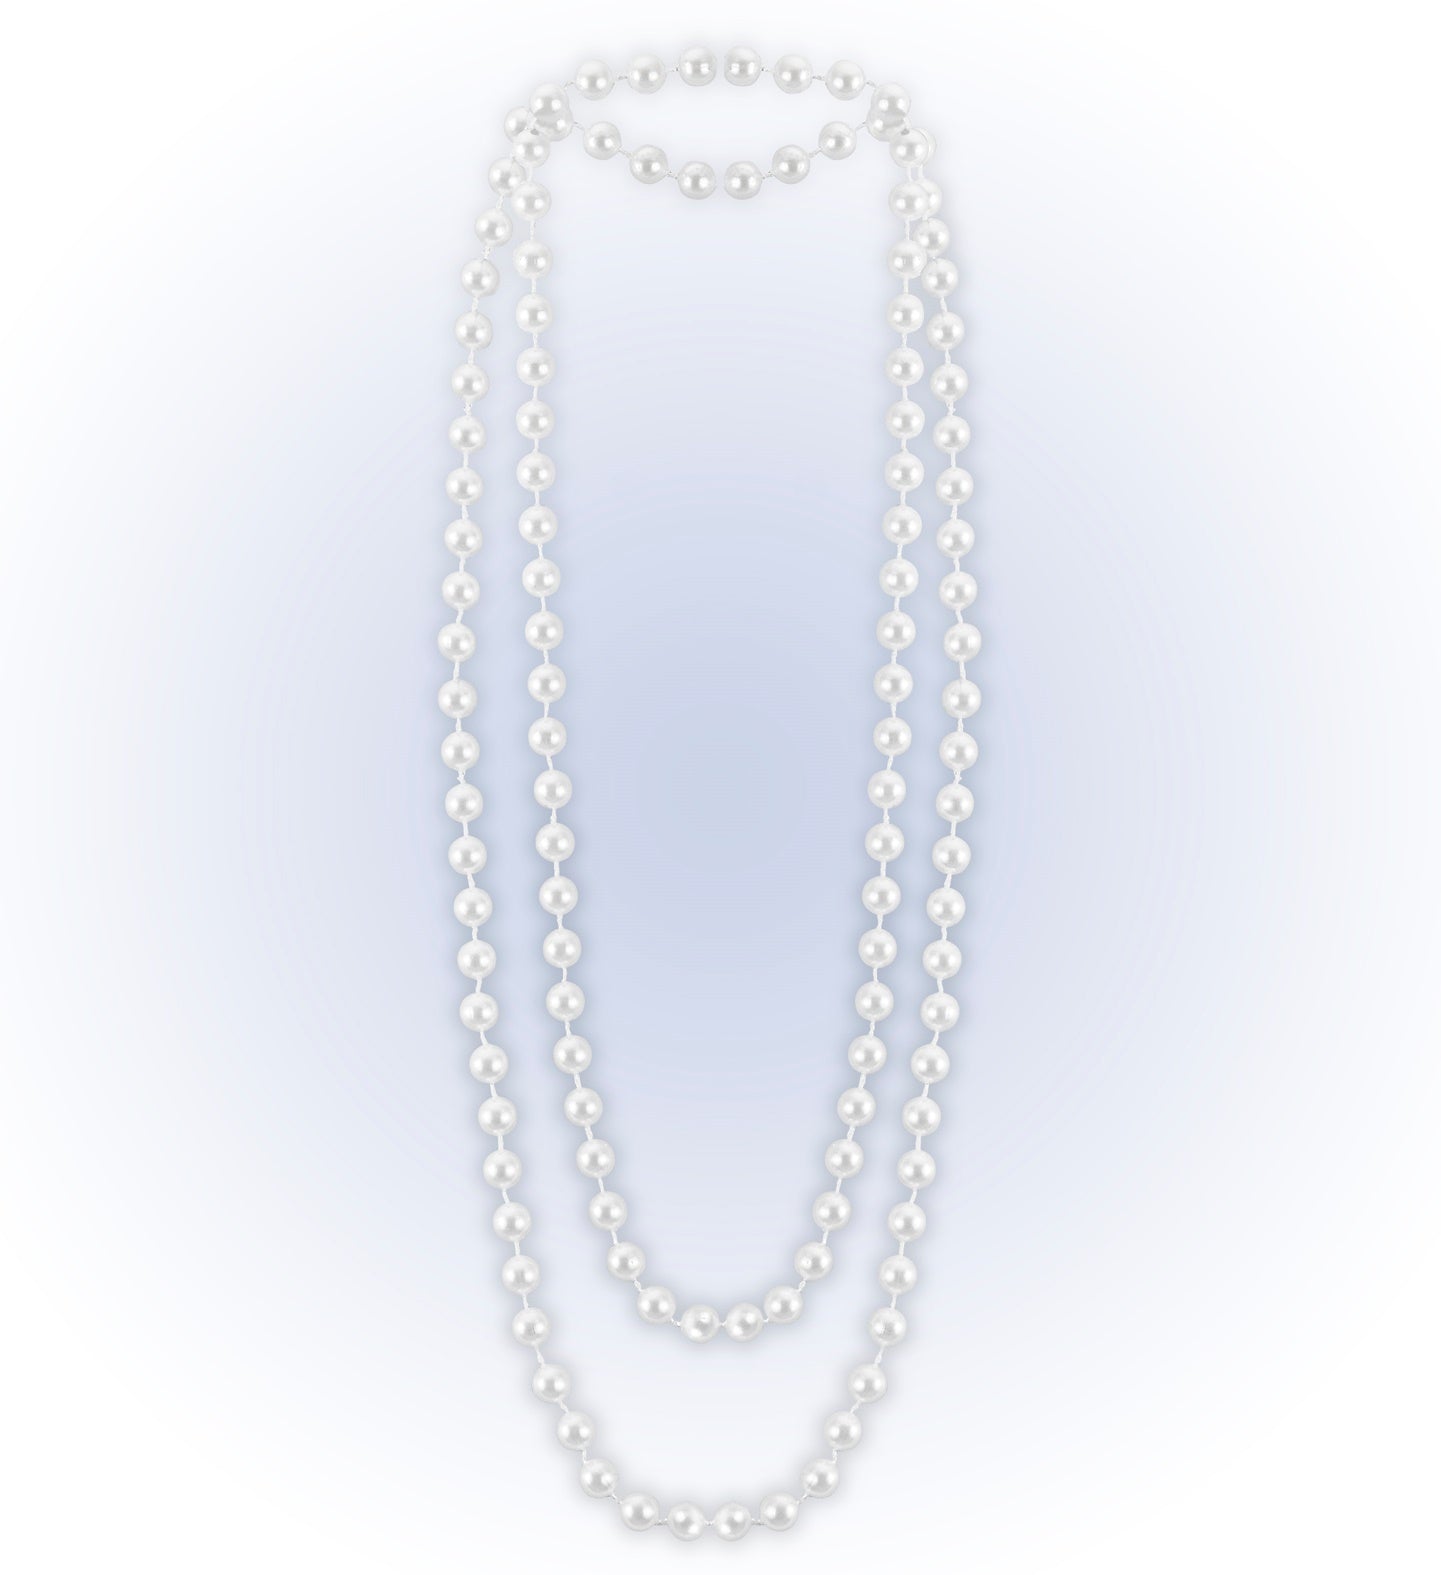 Flapper Pearls Necklace for 1020's costume